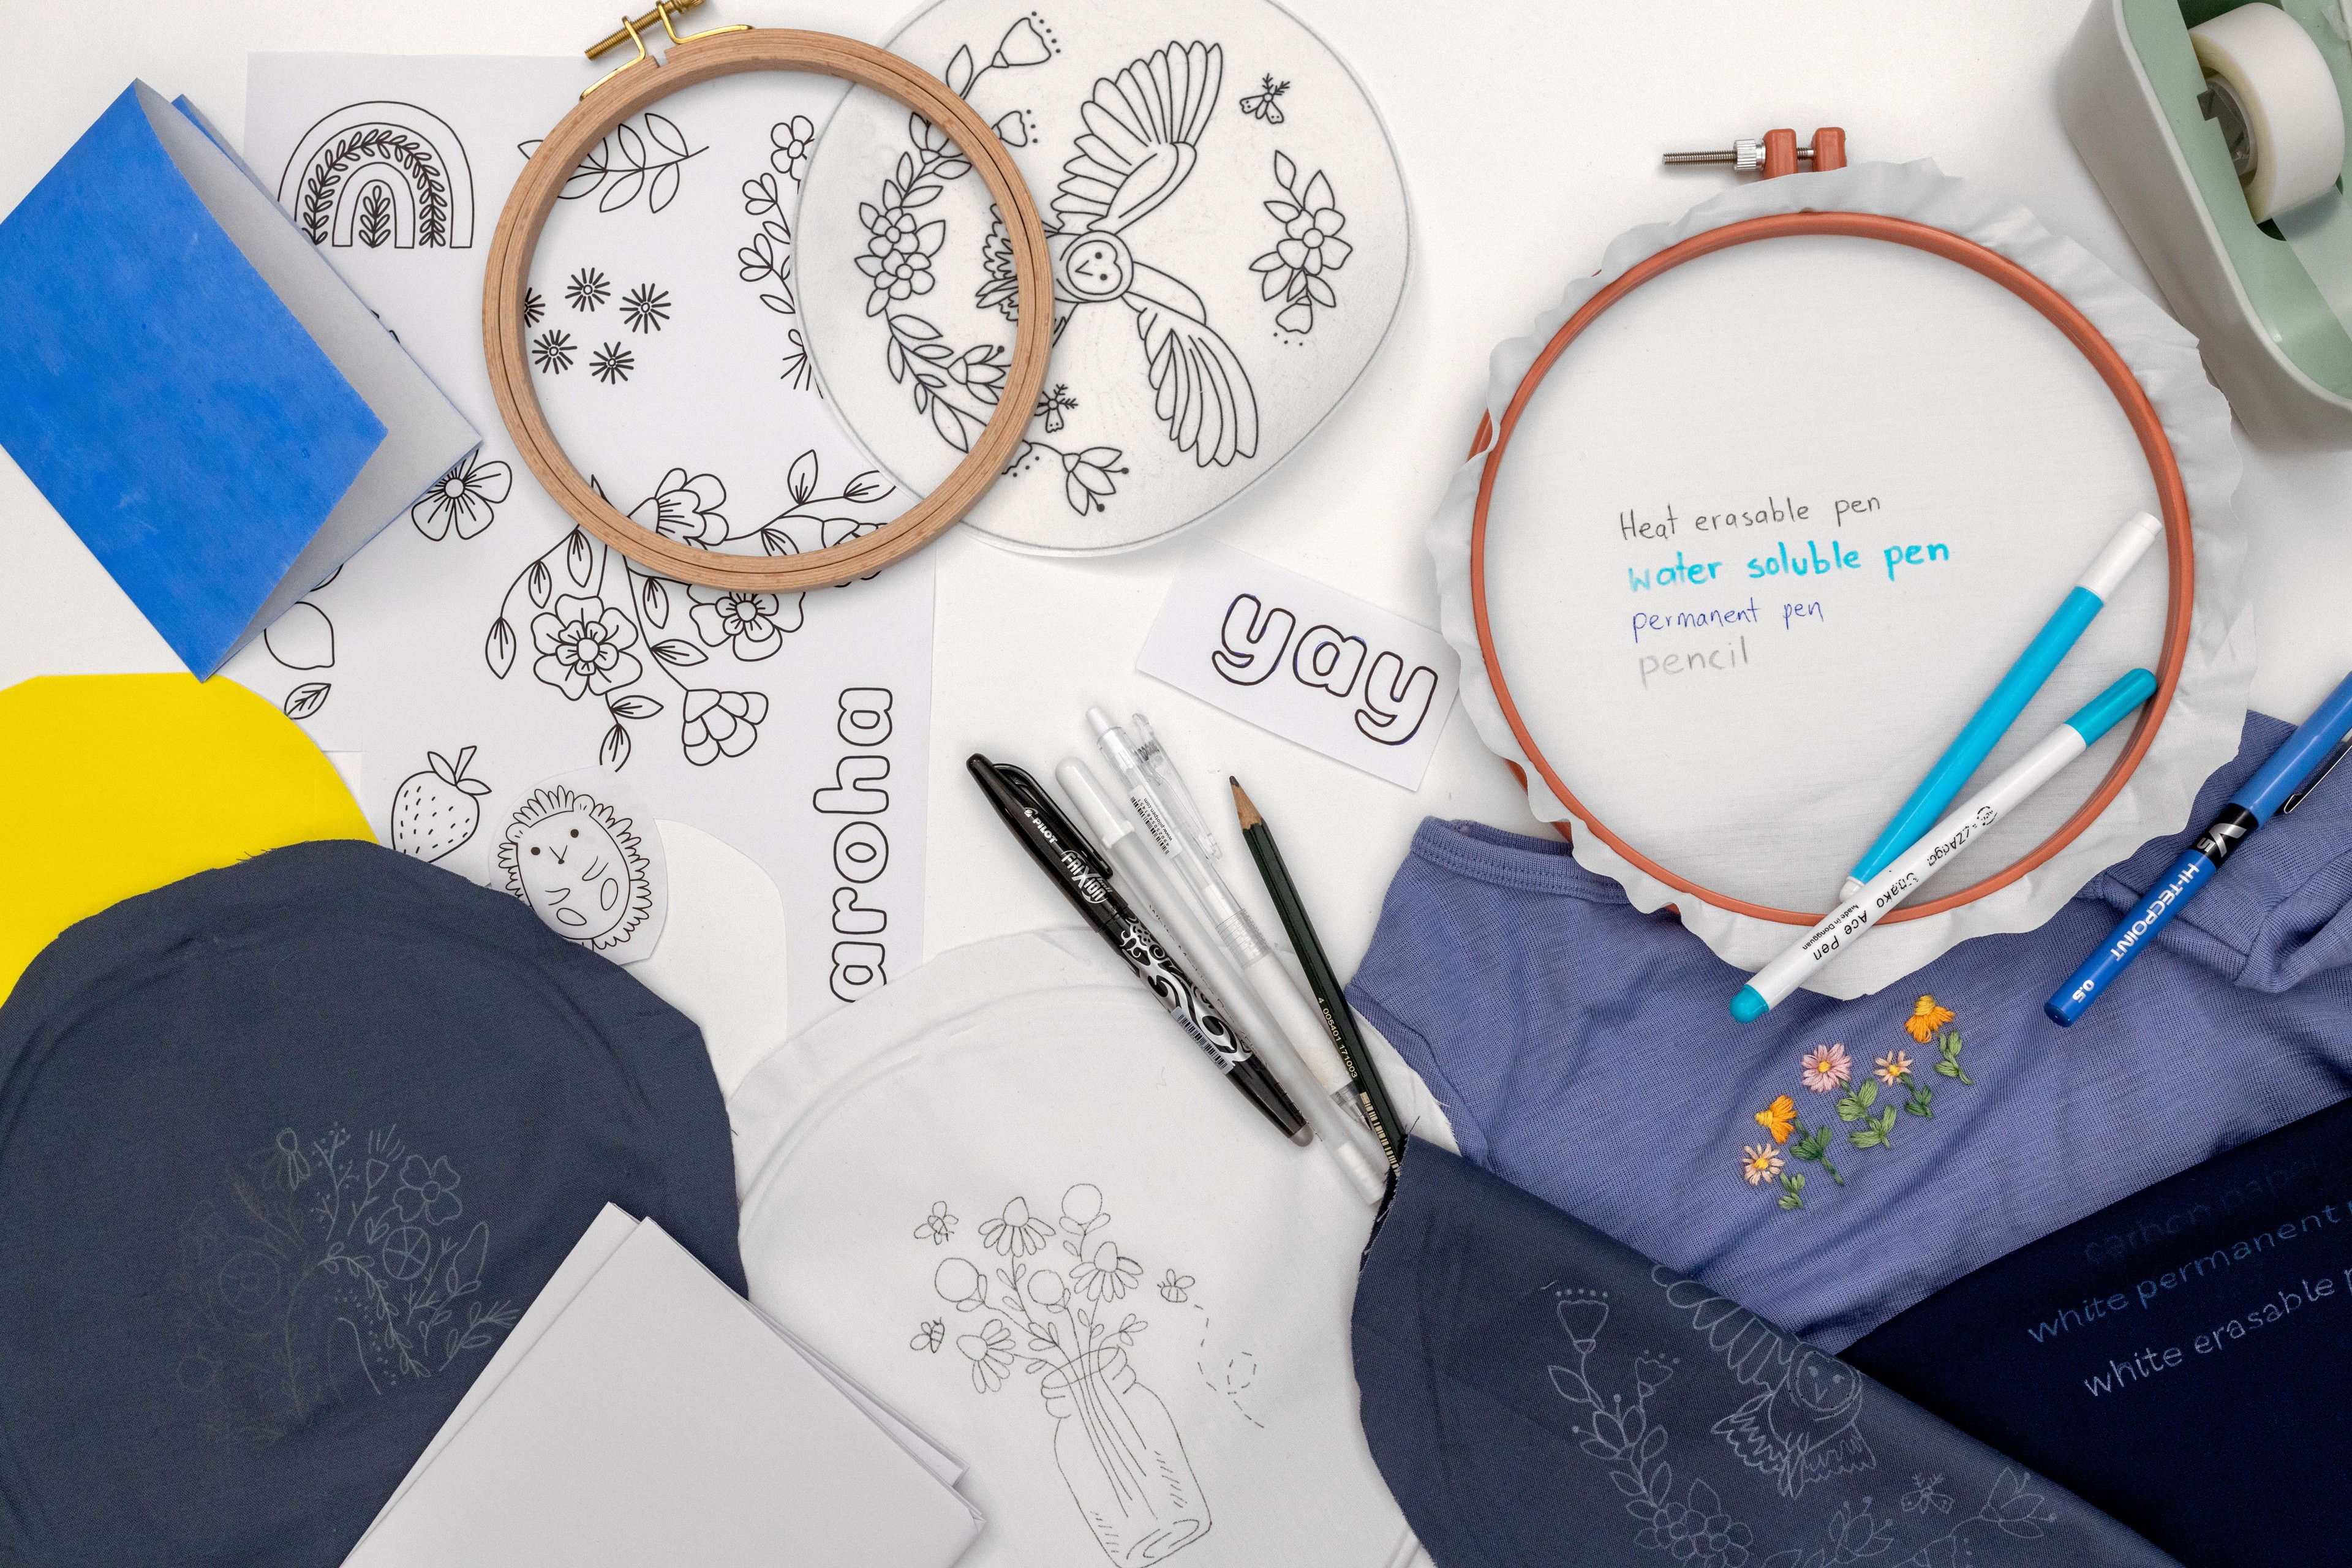 This is a styled image of pens and hoops and patterns drawn on fabric.